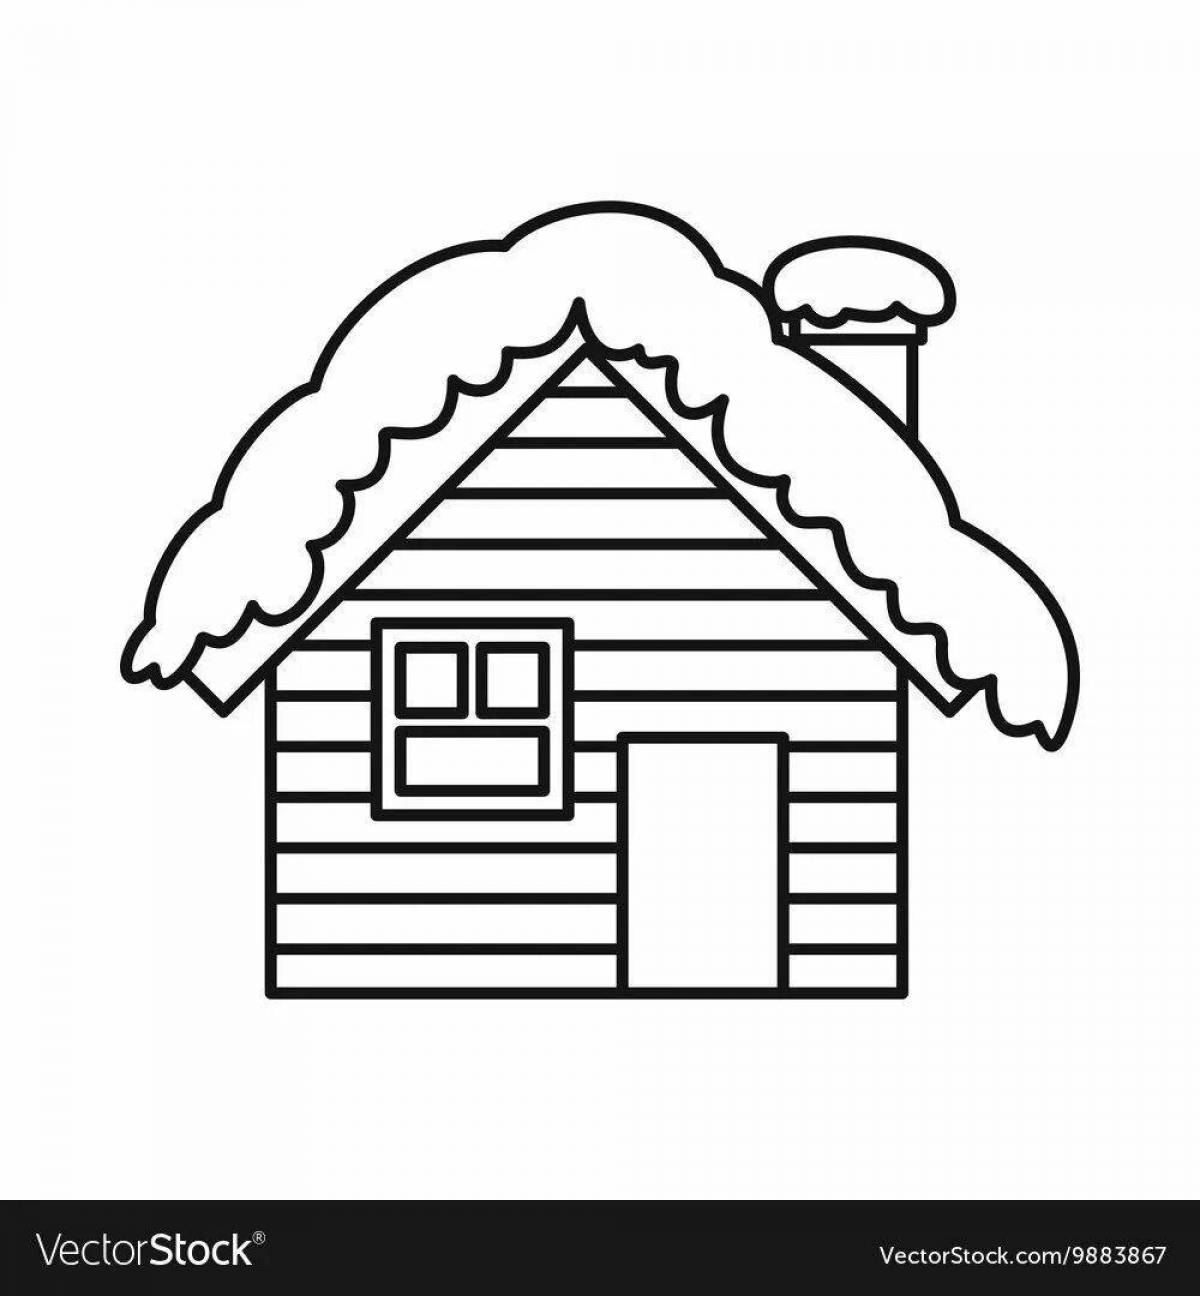 Coloring page cute winter hut